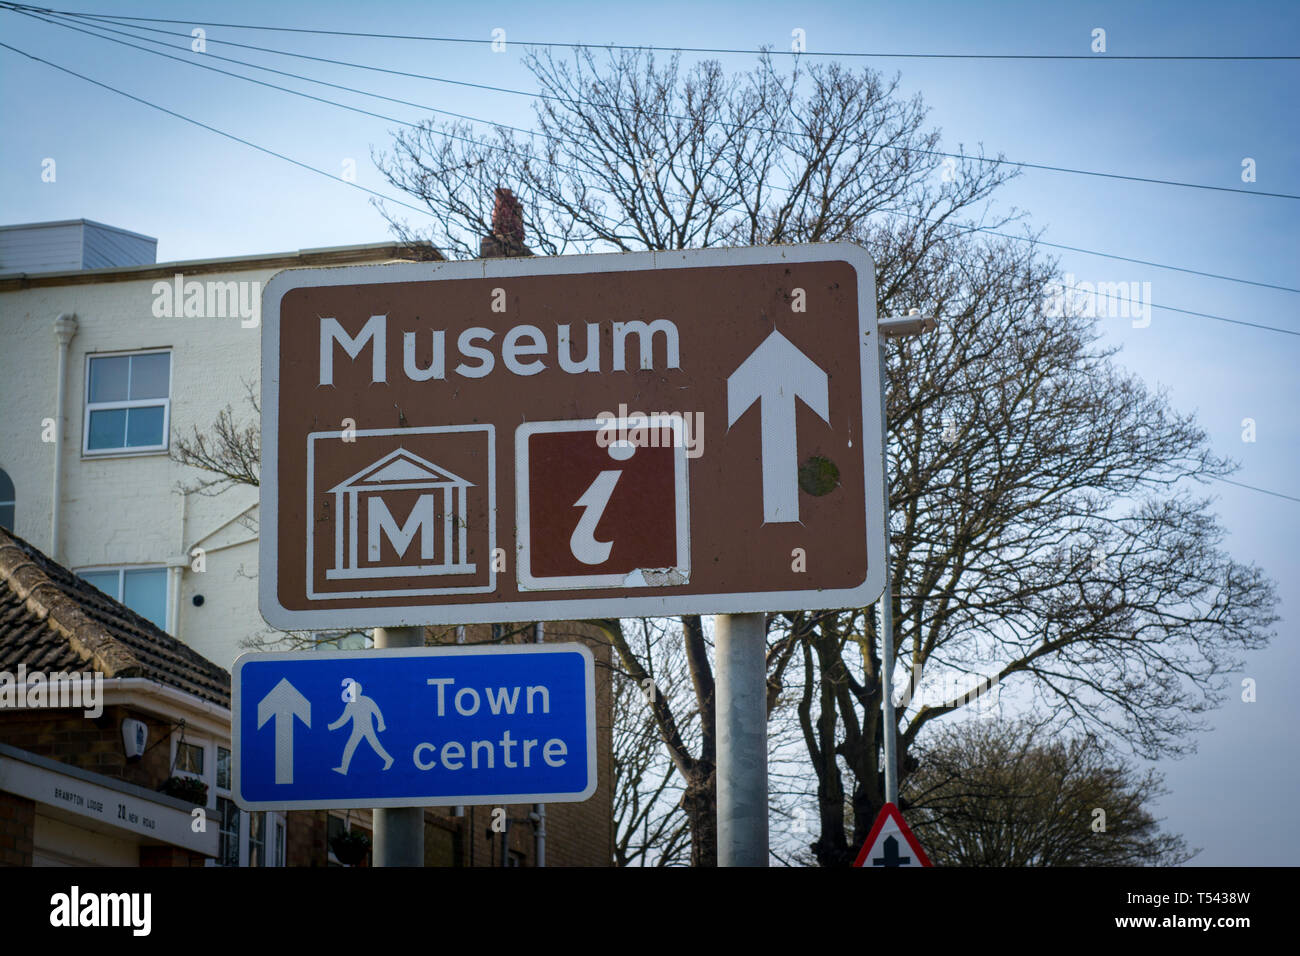 Town center blue sign in english at Hornsea, Yorkshire, UK. Stock Photo